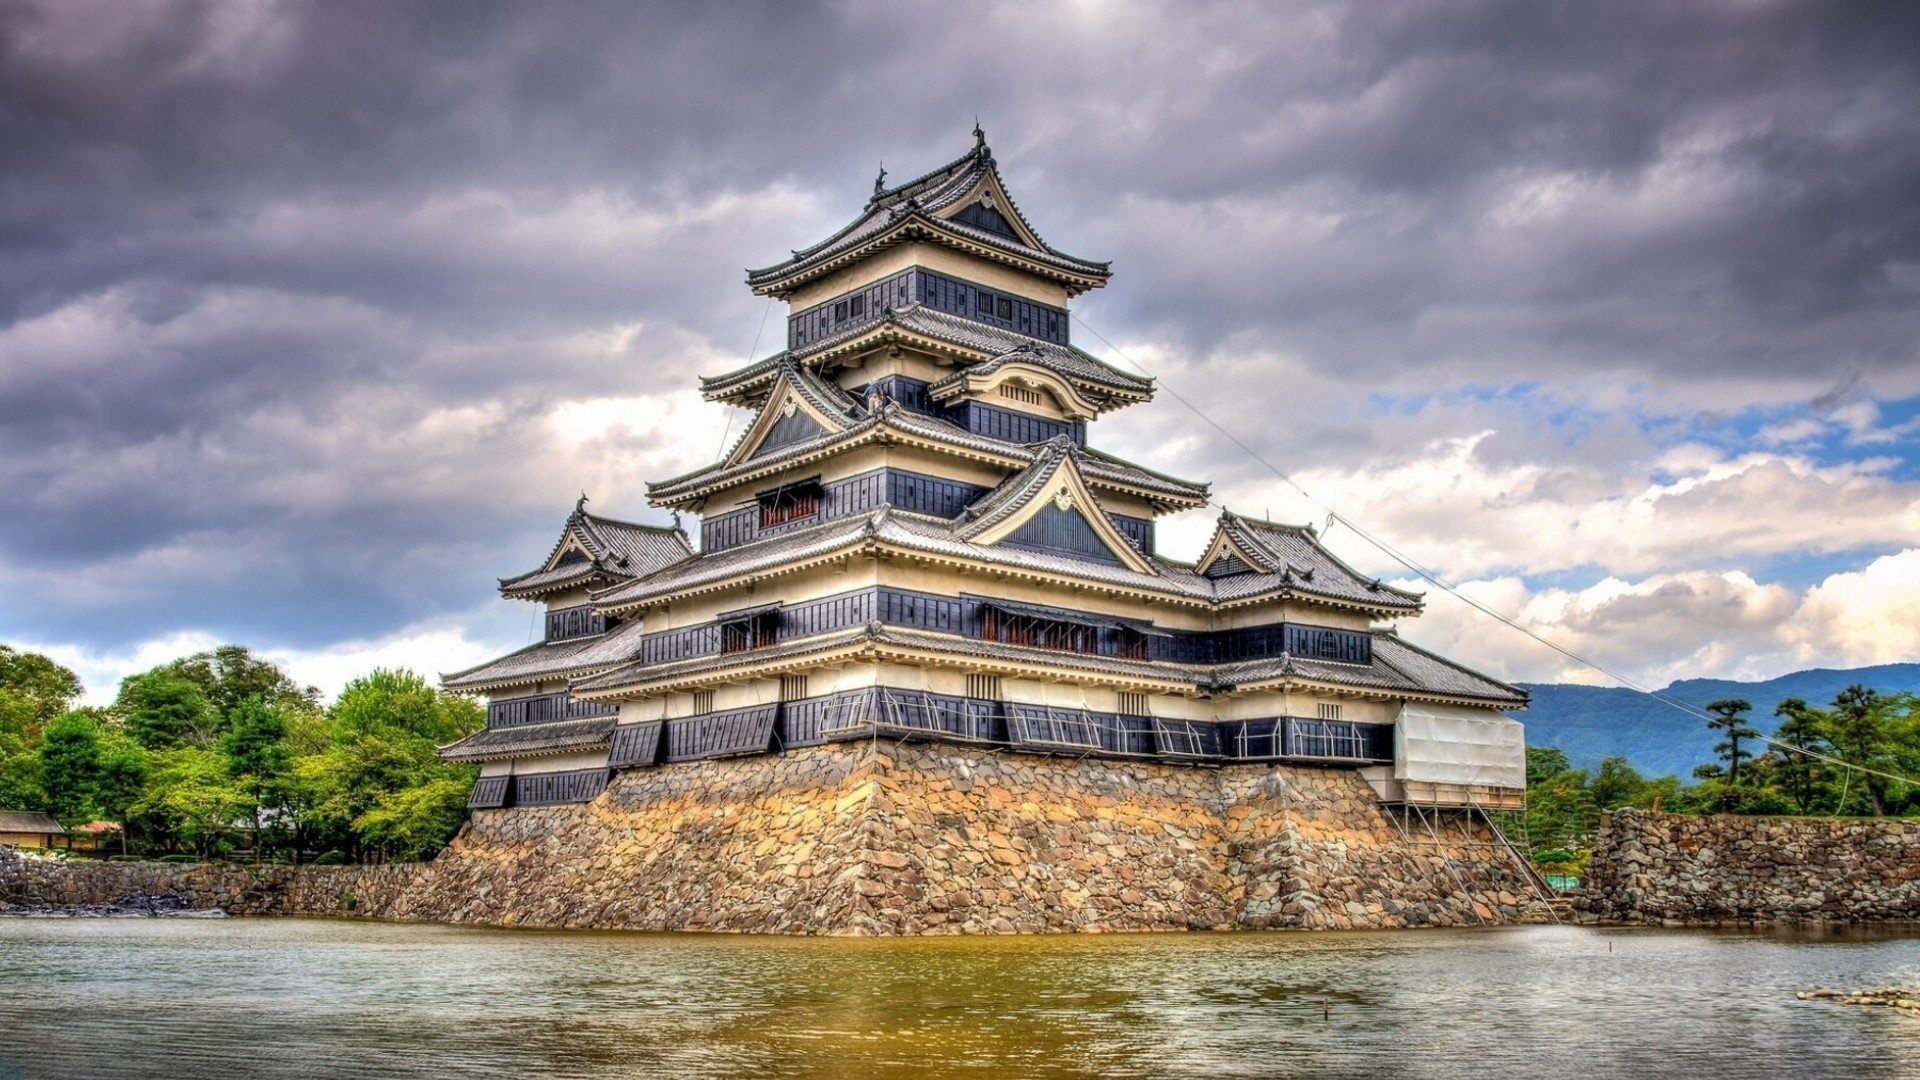 Matsumoto Castle, HD wallpapers, Background images, Stunning photography, 1920x1080 Full HD Desktop